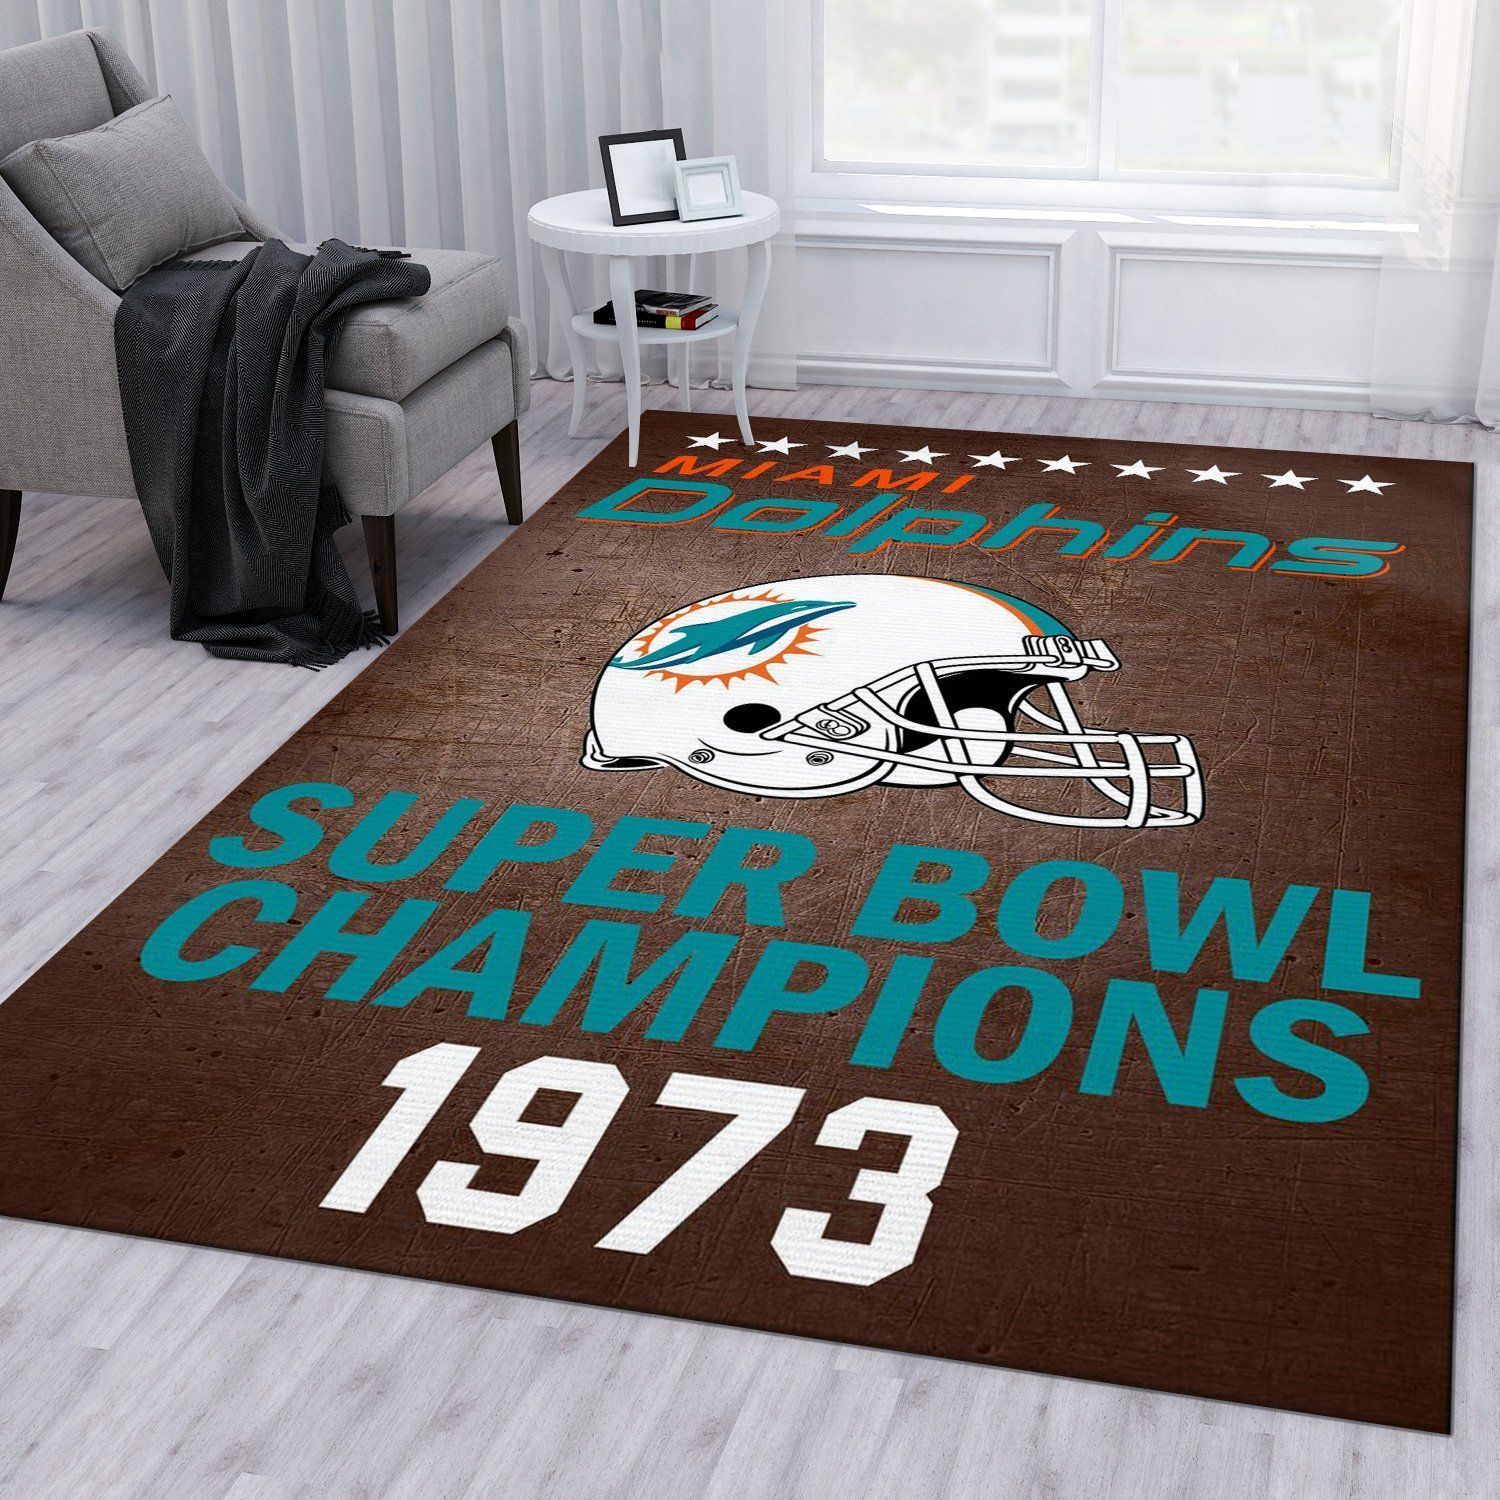 Miami Dolphins 1973 Nfl Football Team Area Rug For Gift Bedroom Rug Christmas Gift US Decor - Indoor Outdoor Rugs